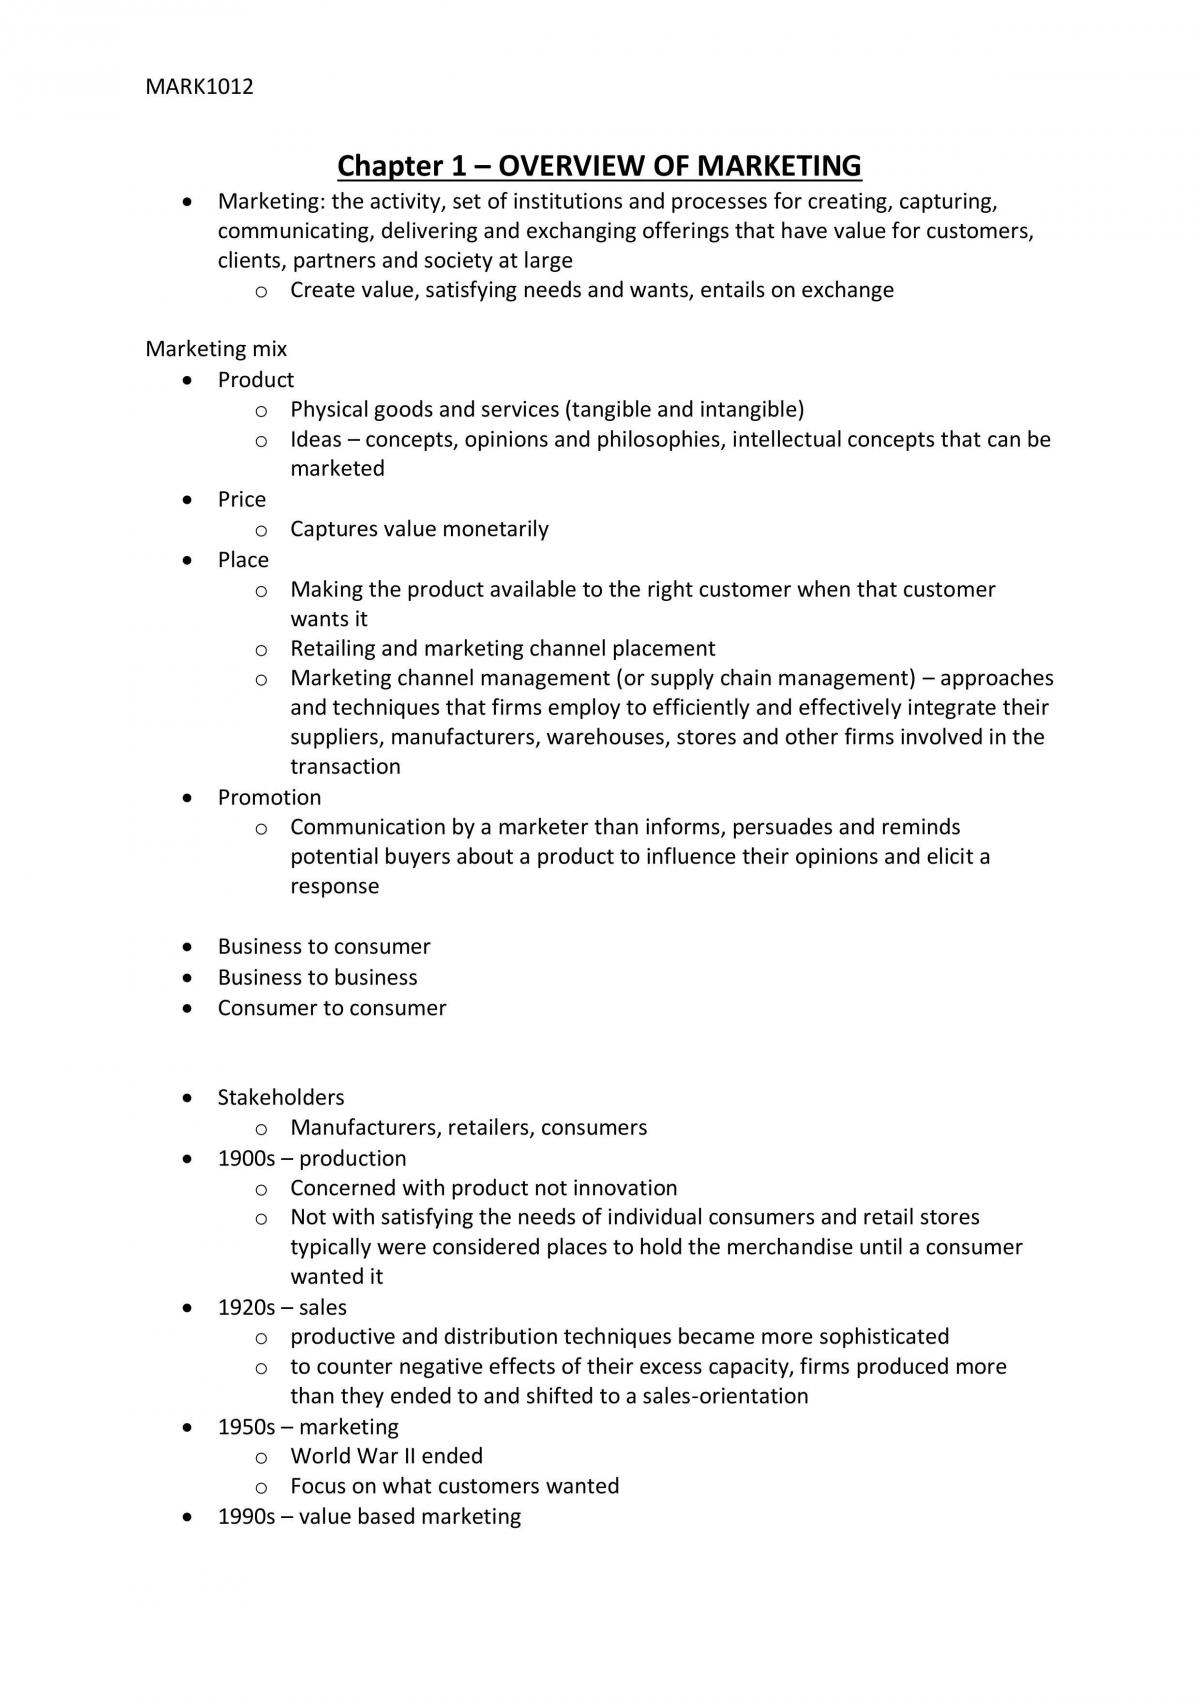 MARK1012 HD Notes - Page 1